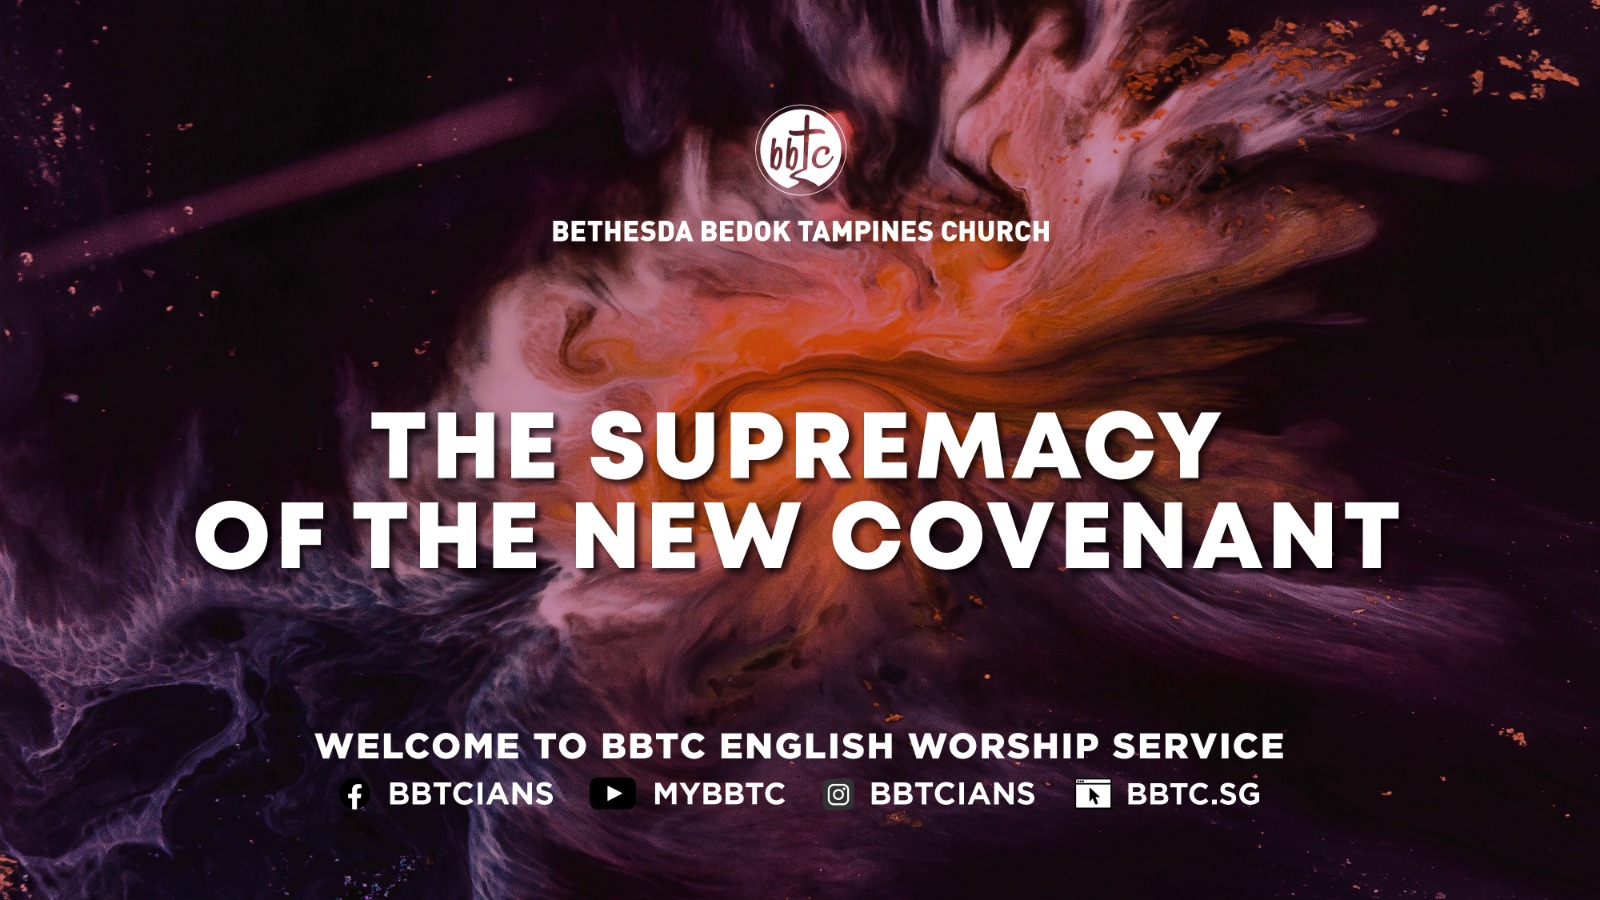 The Supremacy of the New Covenant